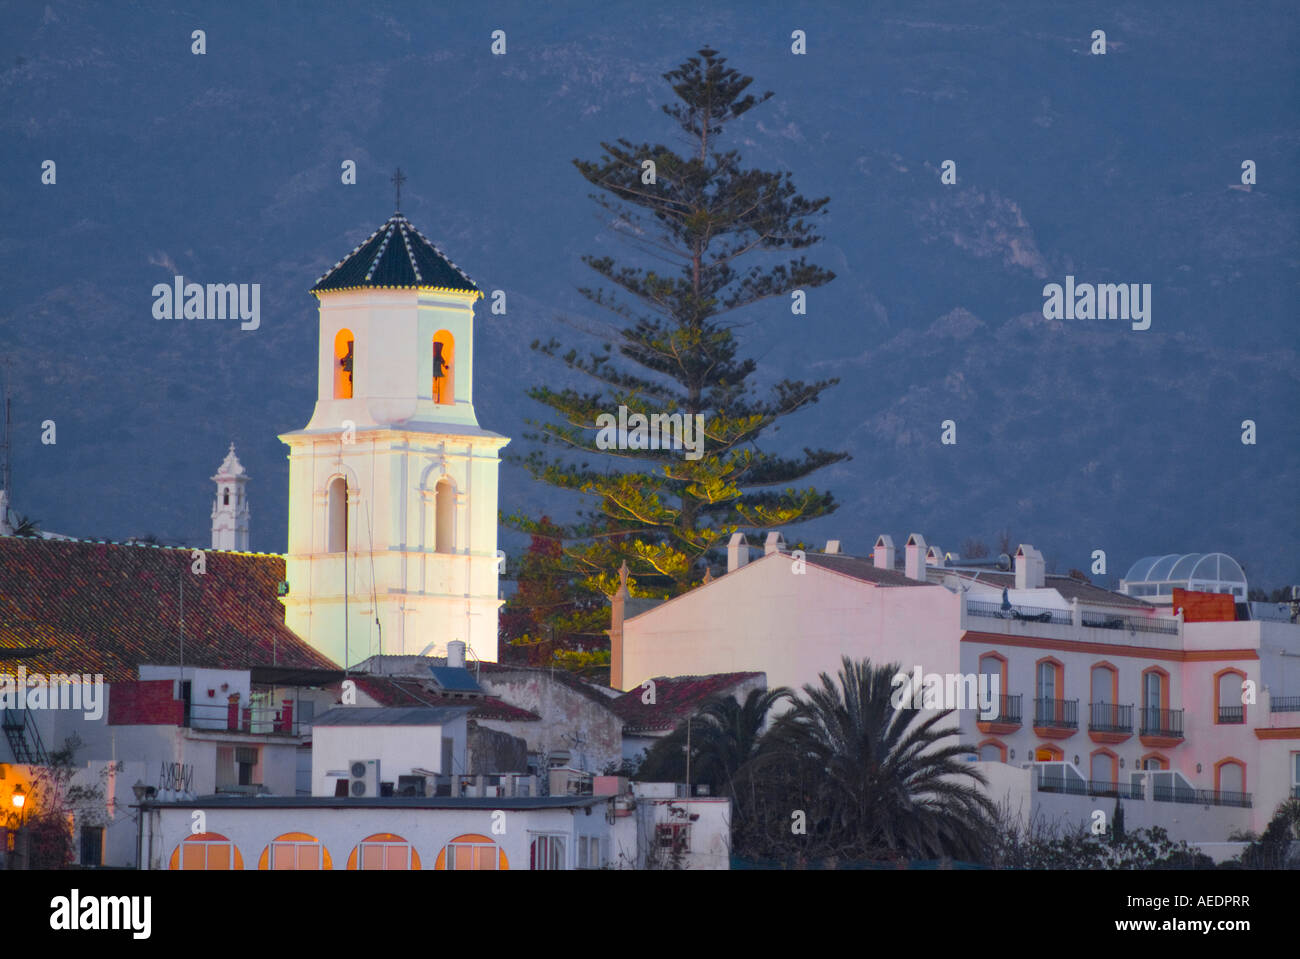 Evening shot of church steeple in Nerja Spain with bell tower lights contrasting with the dark of night Stock Photo